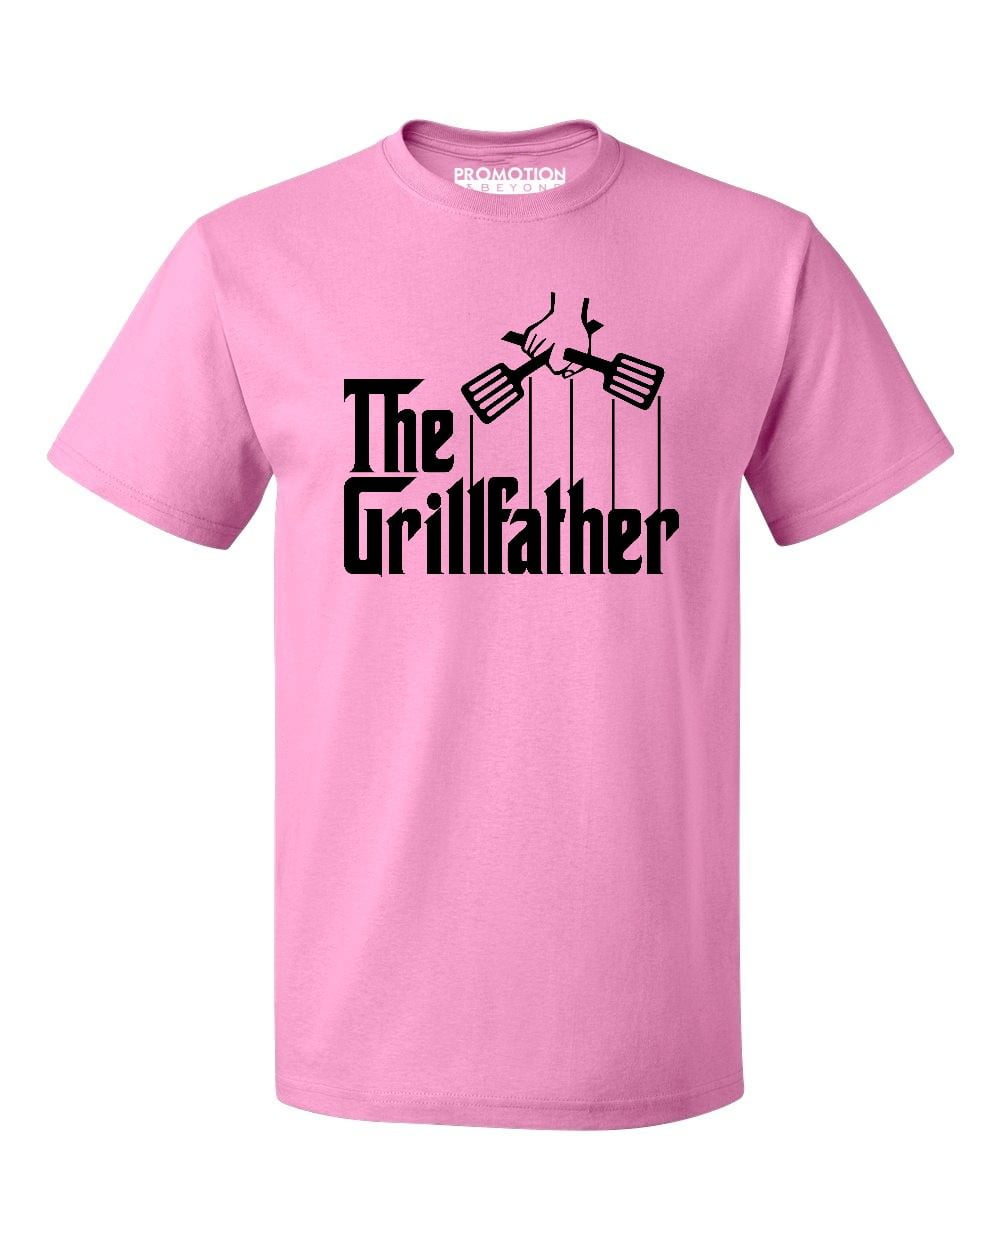 Funny Grilling T-Shirt, Meat Smoker T-shirt, Anniversary Gifts For Husband  Dad Grandpa, Gifts For Father, Birthday Gift For Men